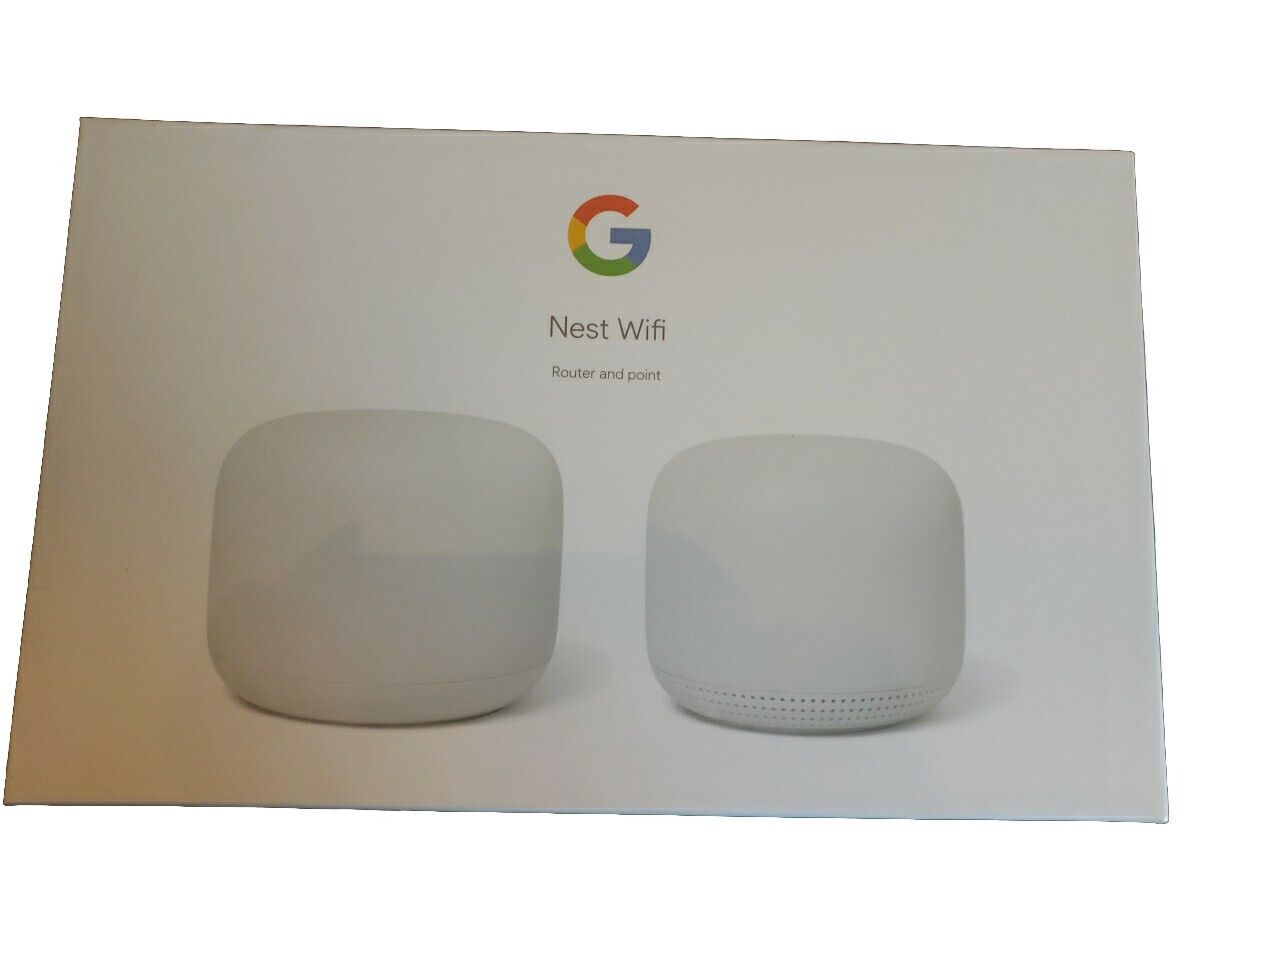 Google Nest Wifi Router and Point - Snow - NEW, SEALED IN BOX